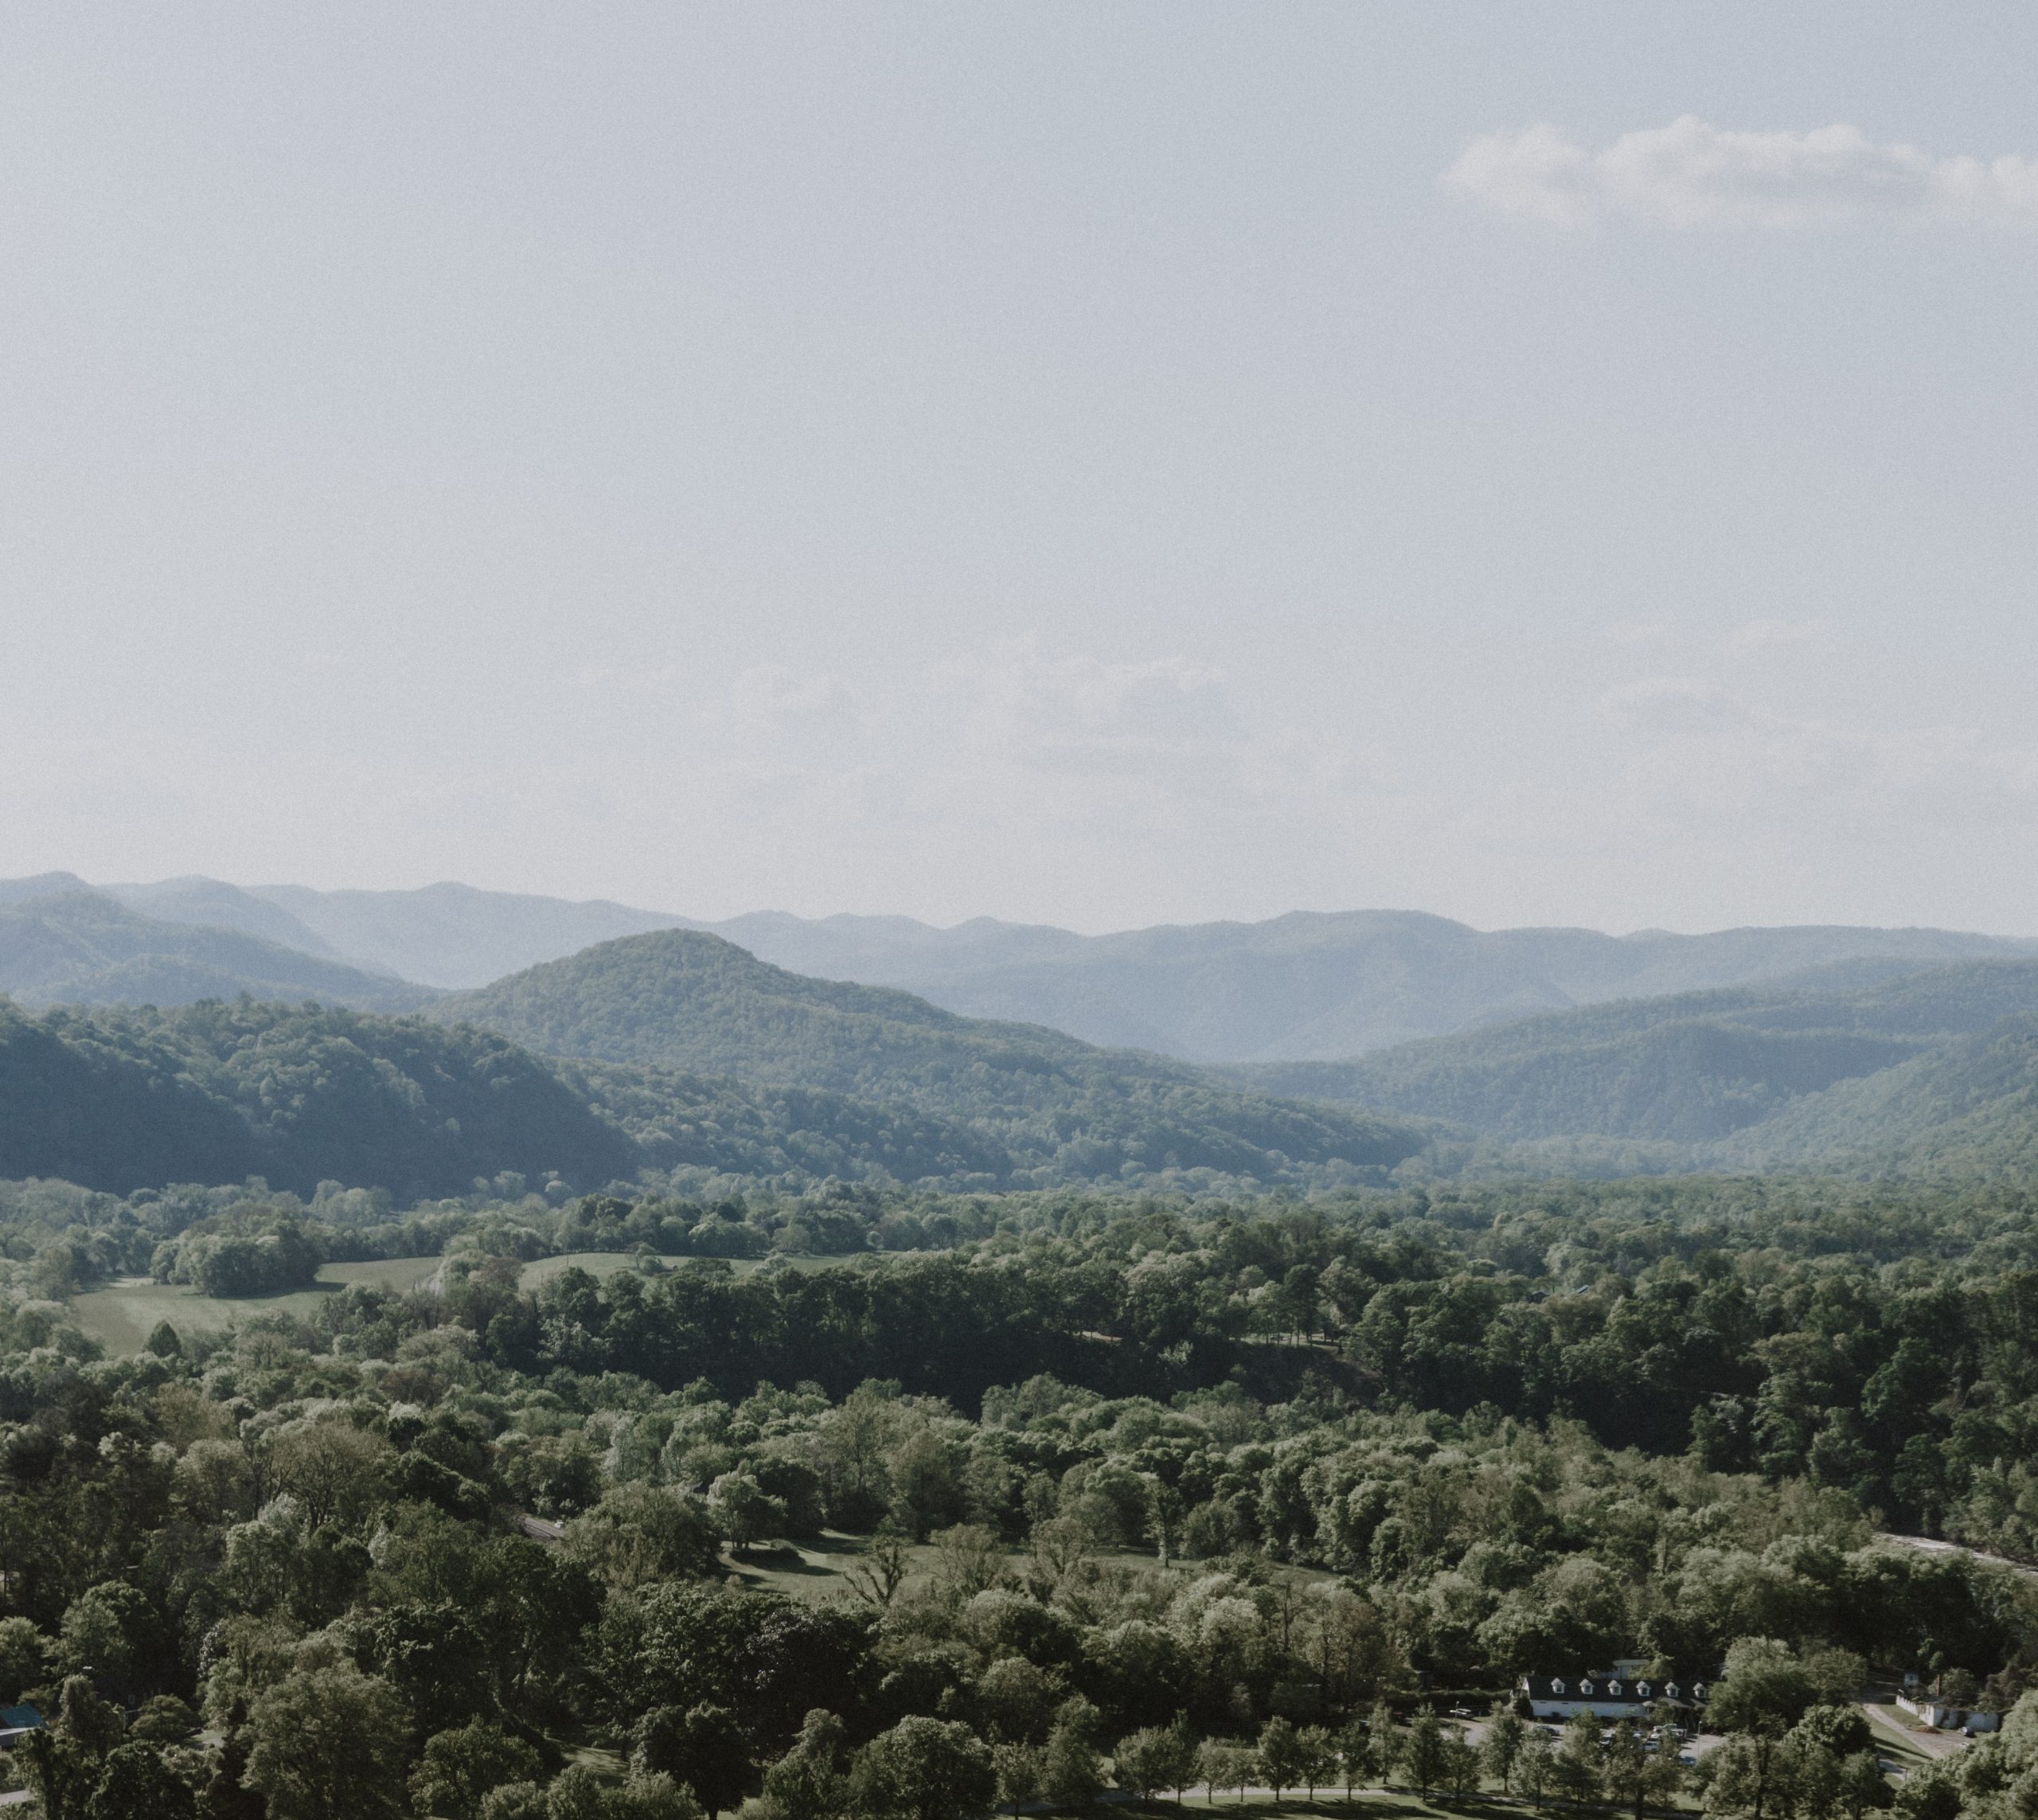 This Month in ReImagine Appalachia: August 31, 2021